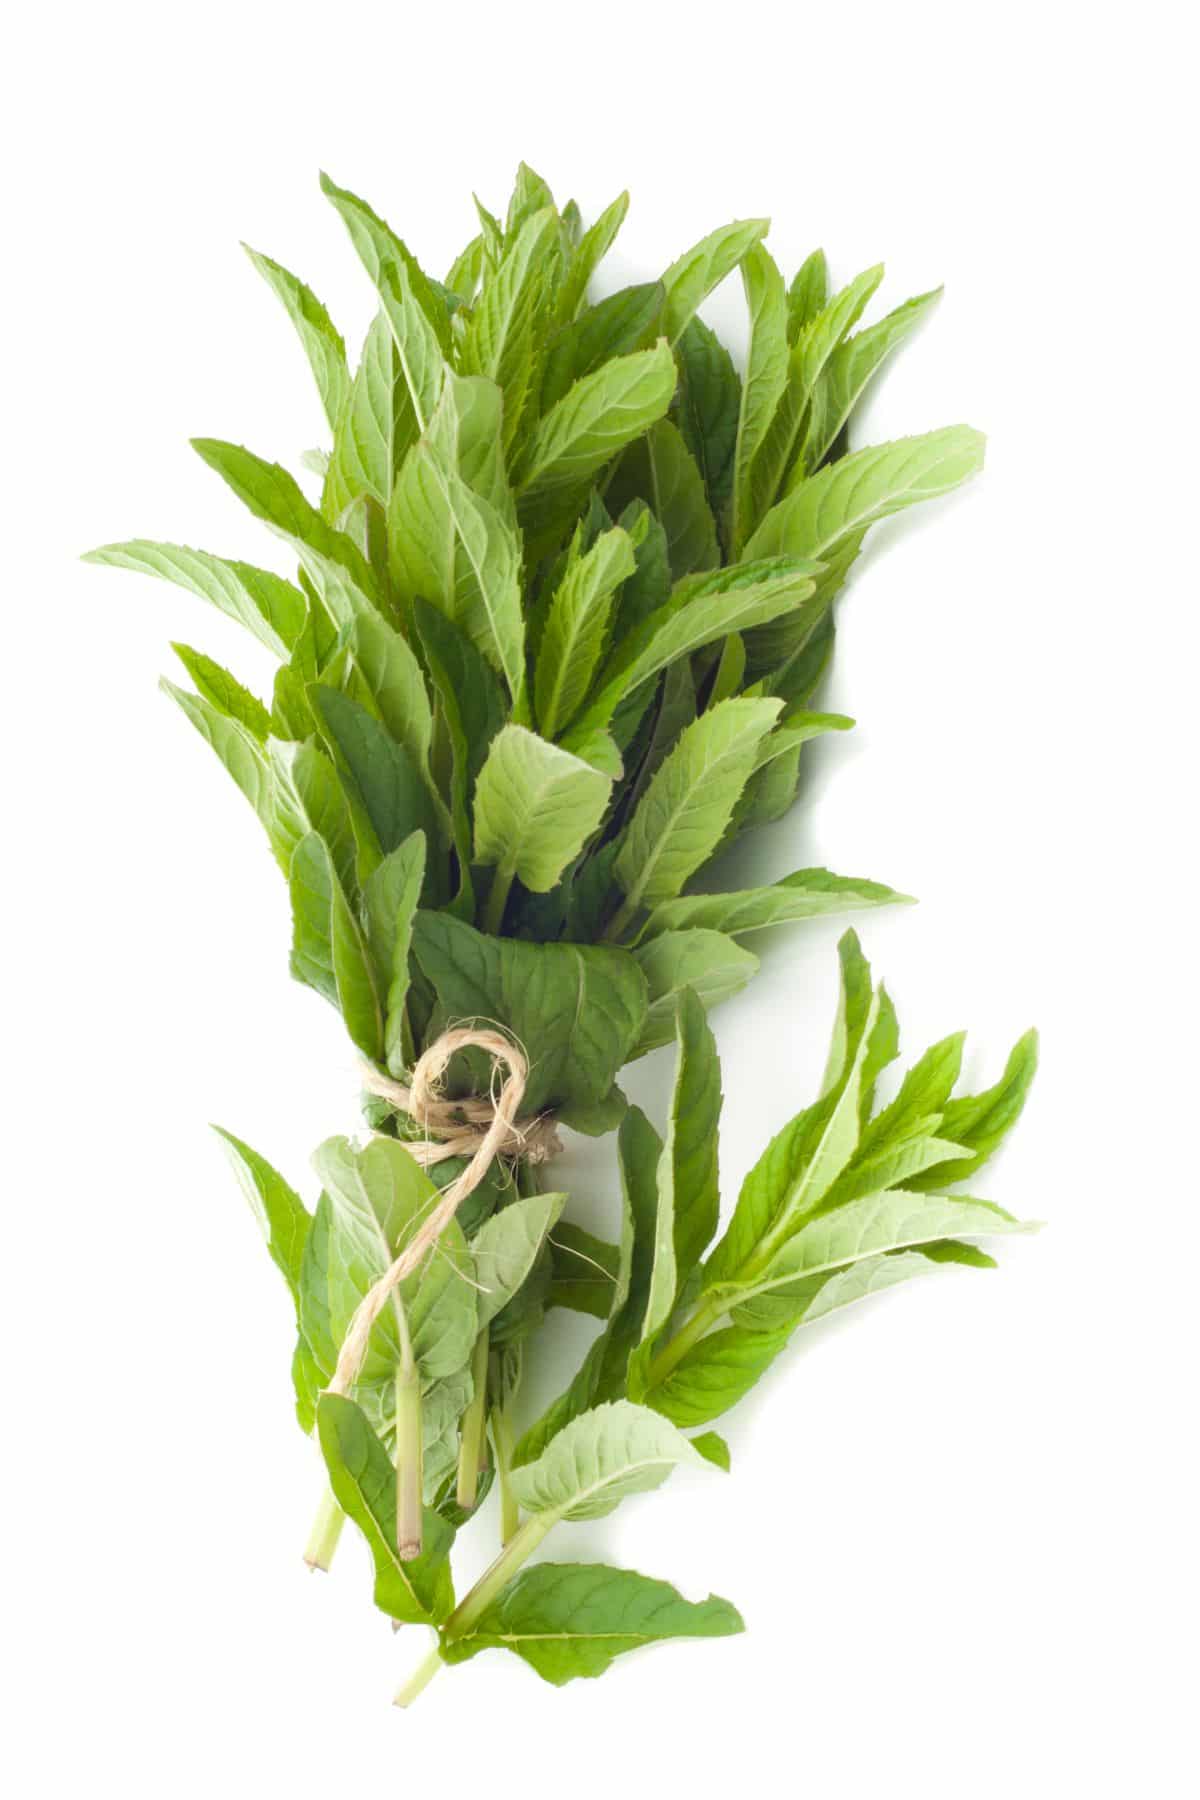 Bunch of fresh tarragon leaves on white background.